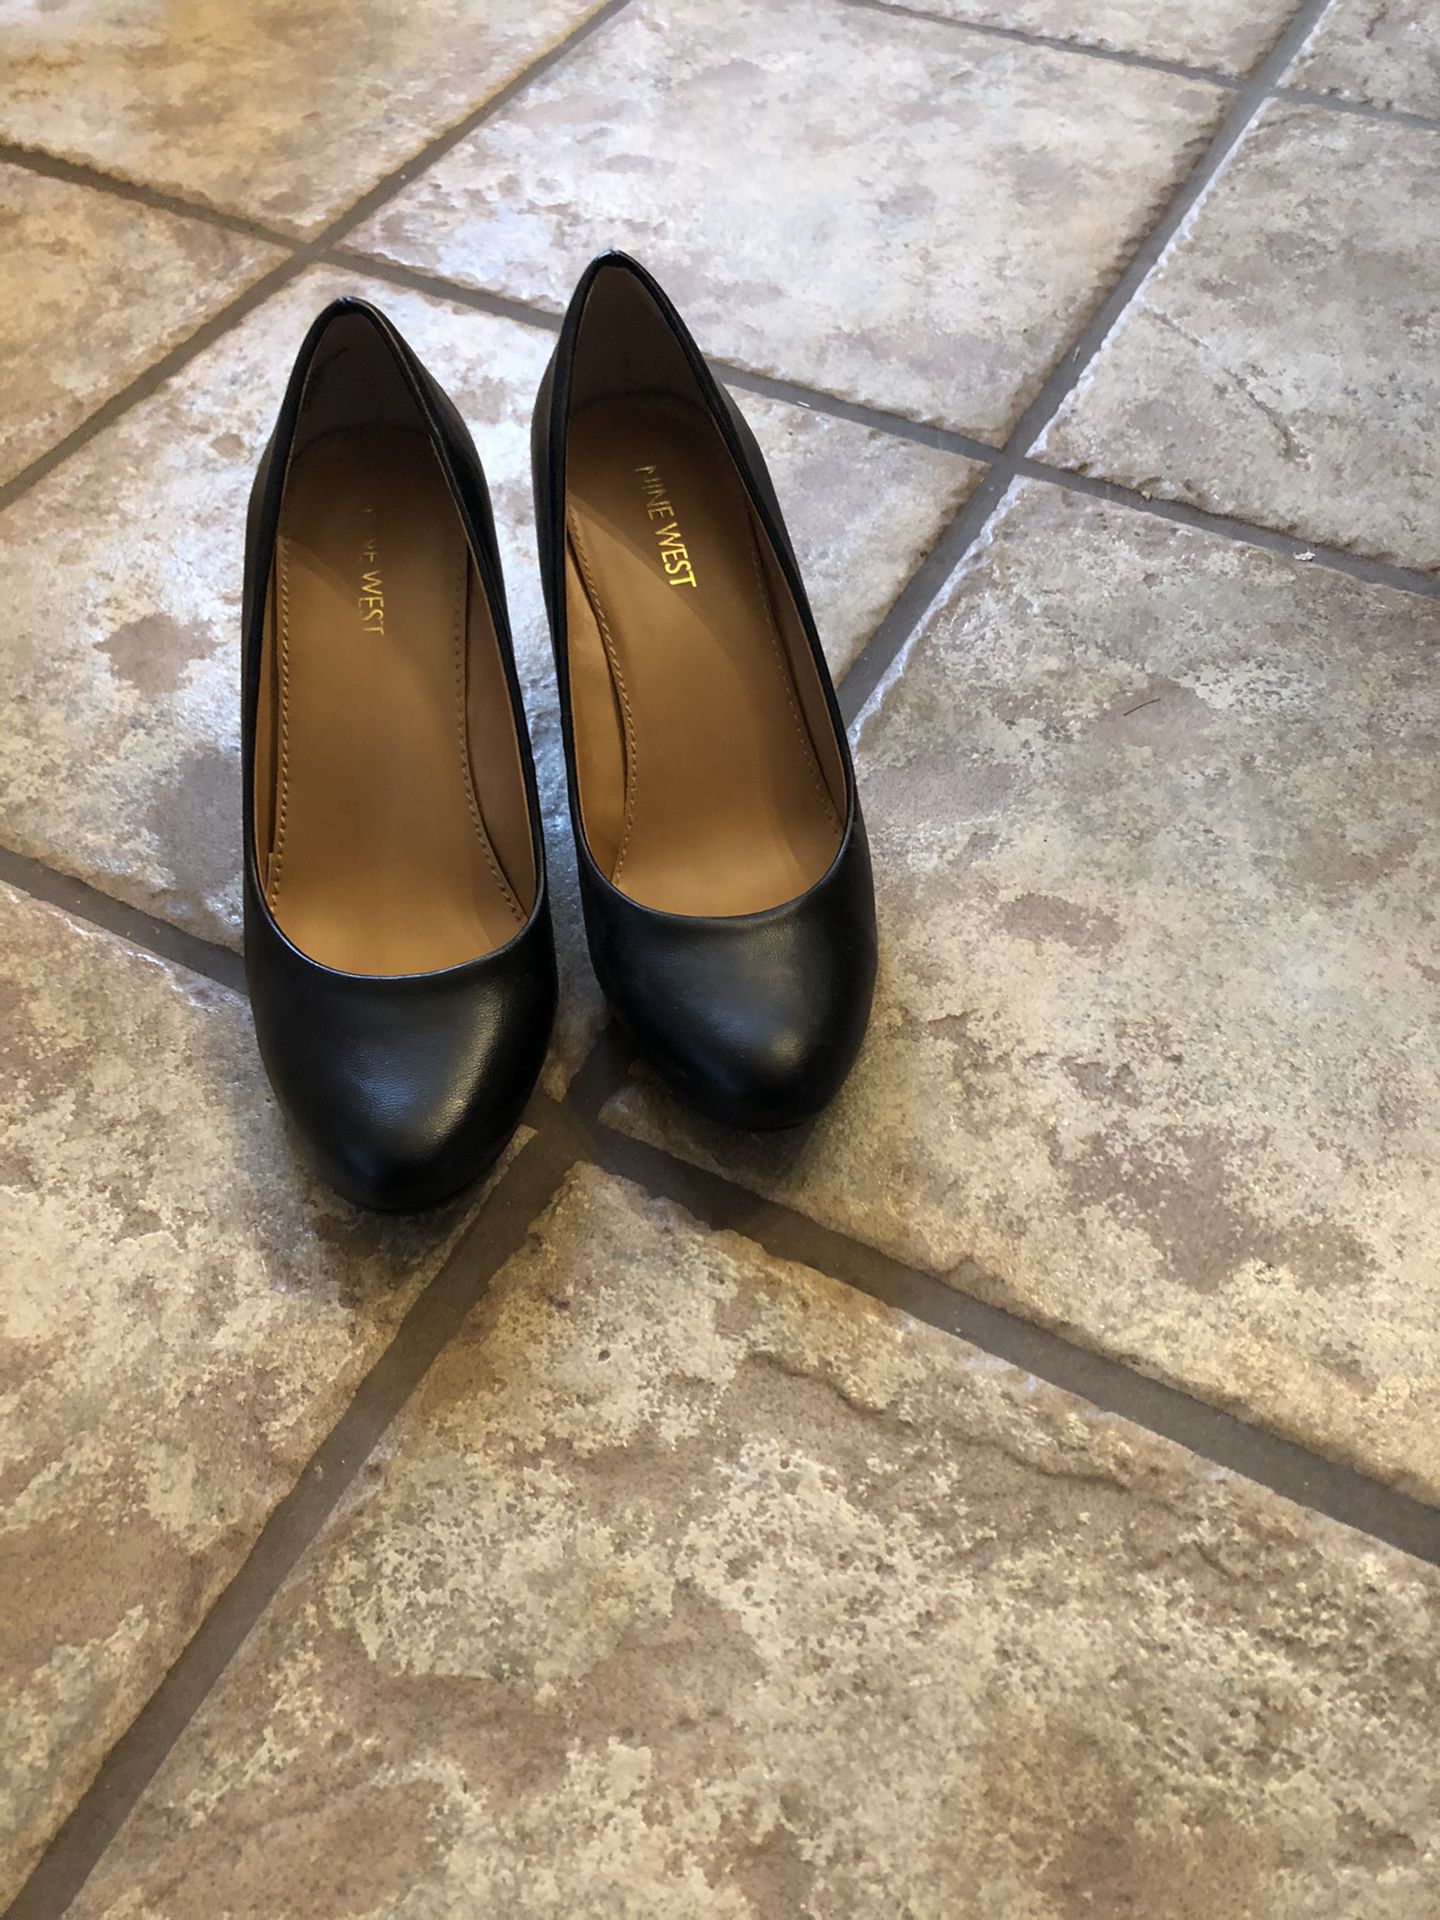 Nine West, black wedge heel pumps. 7 M. Only worn a couple of times.